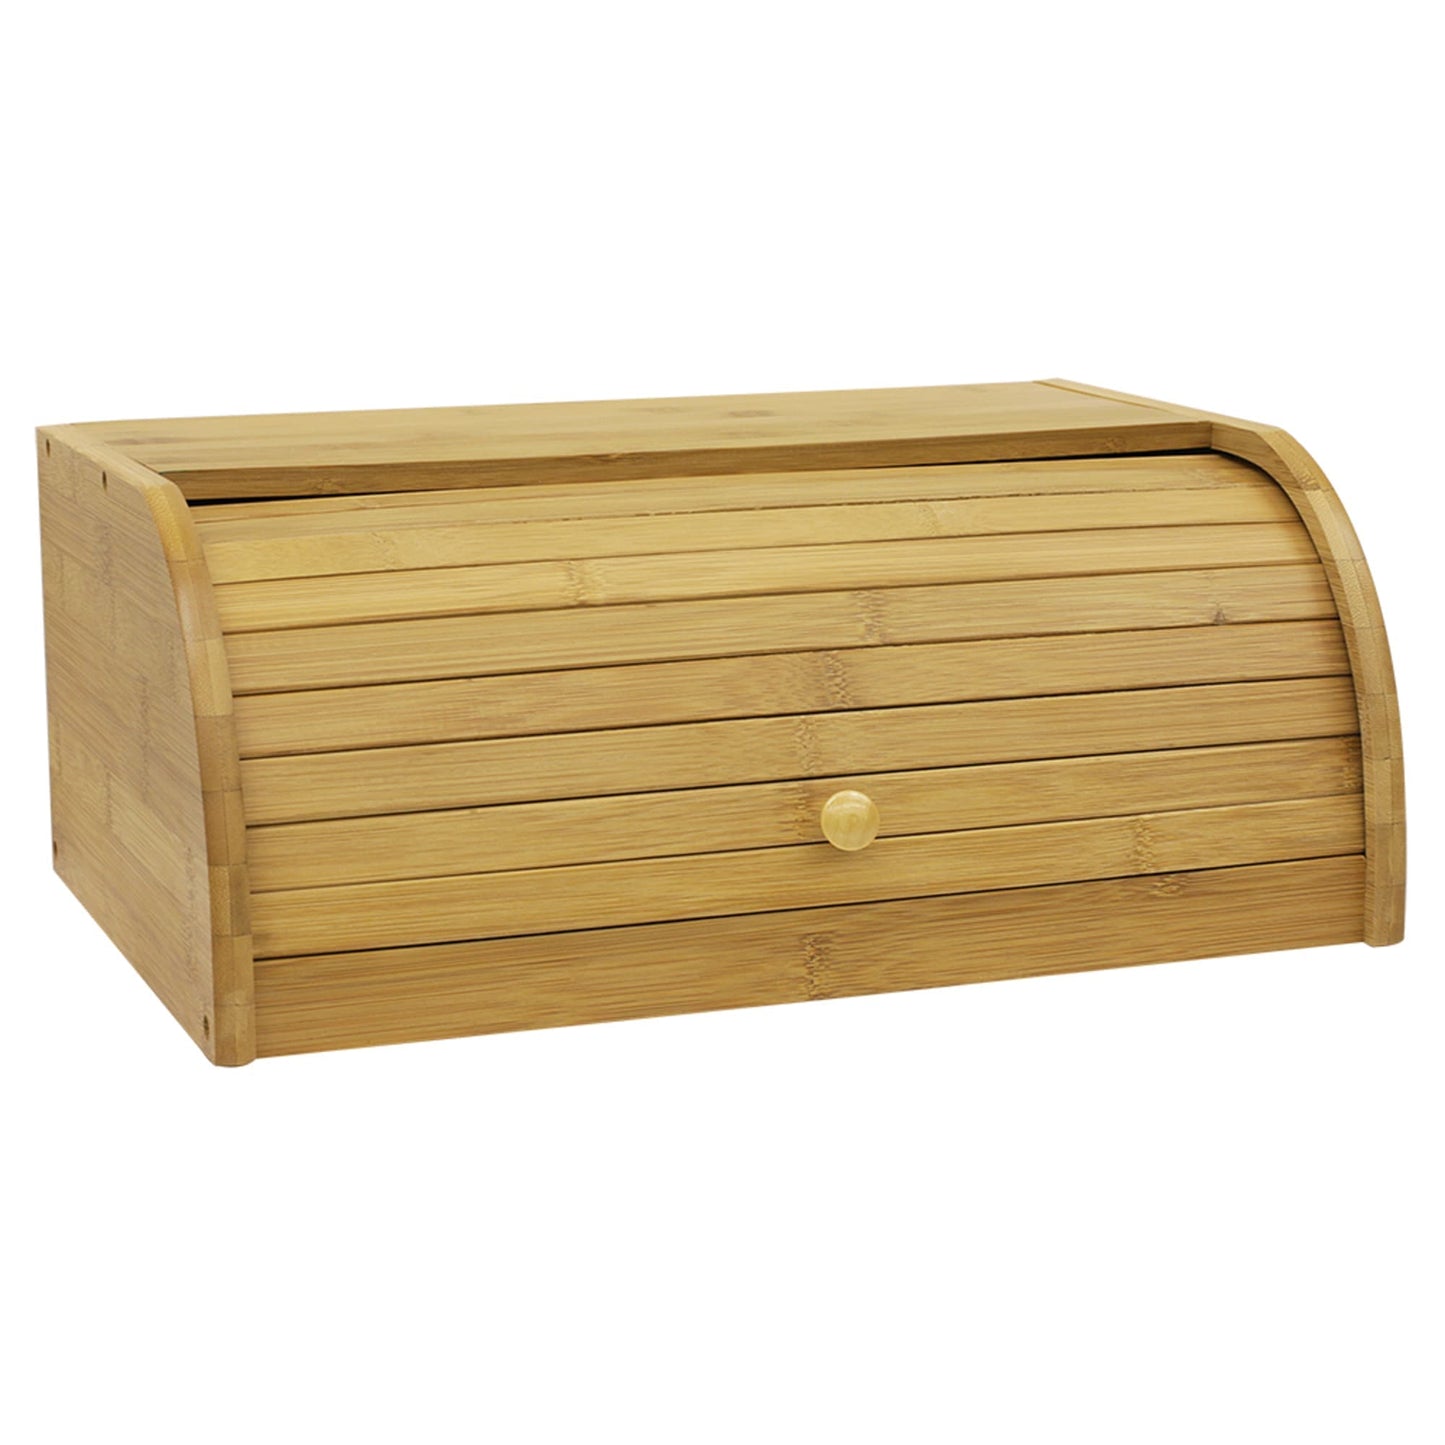 Roll Top Slatted Bamboo Bread Box, Natural